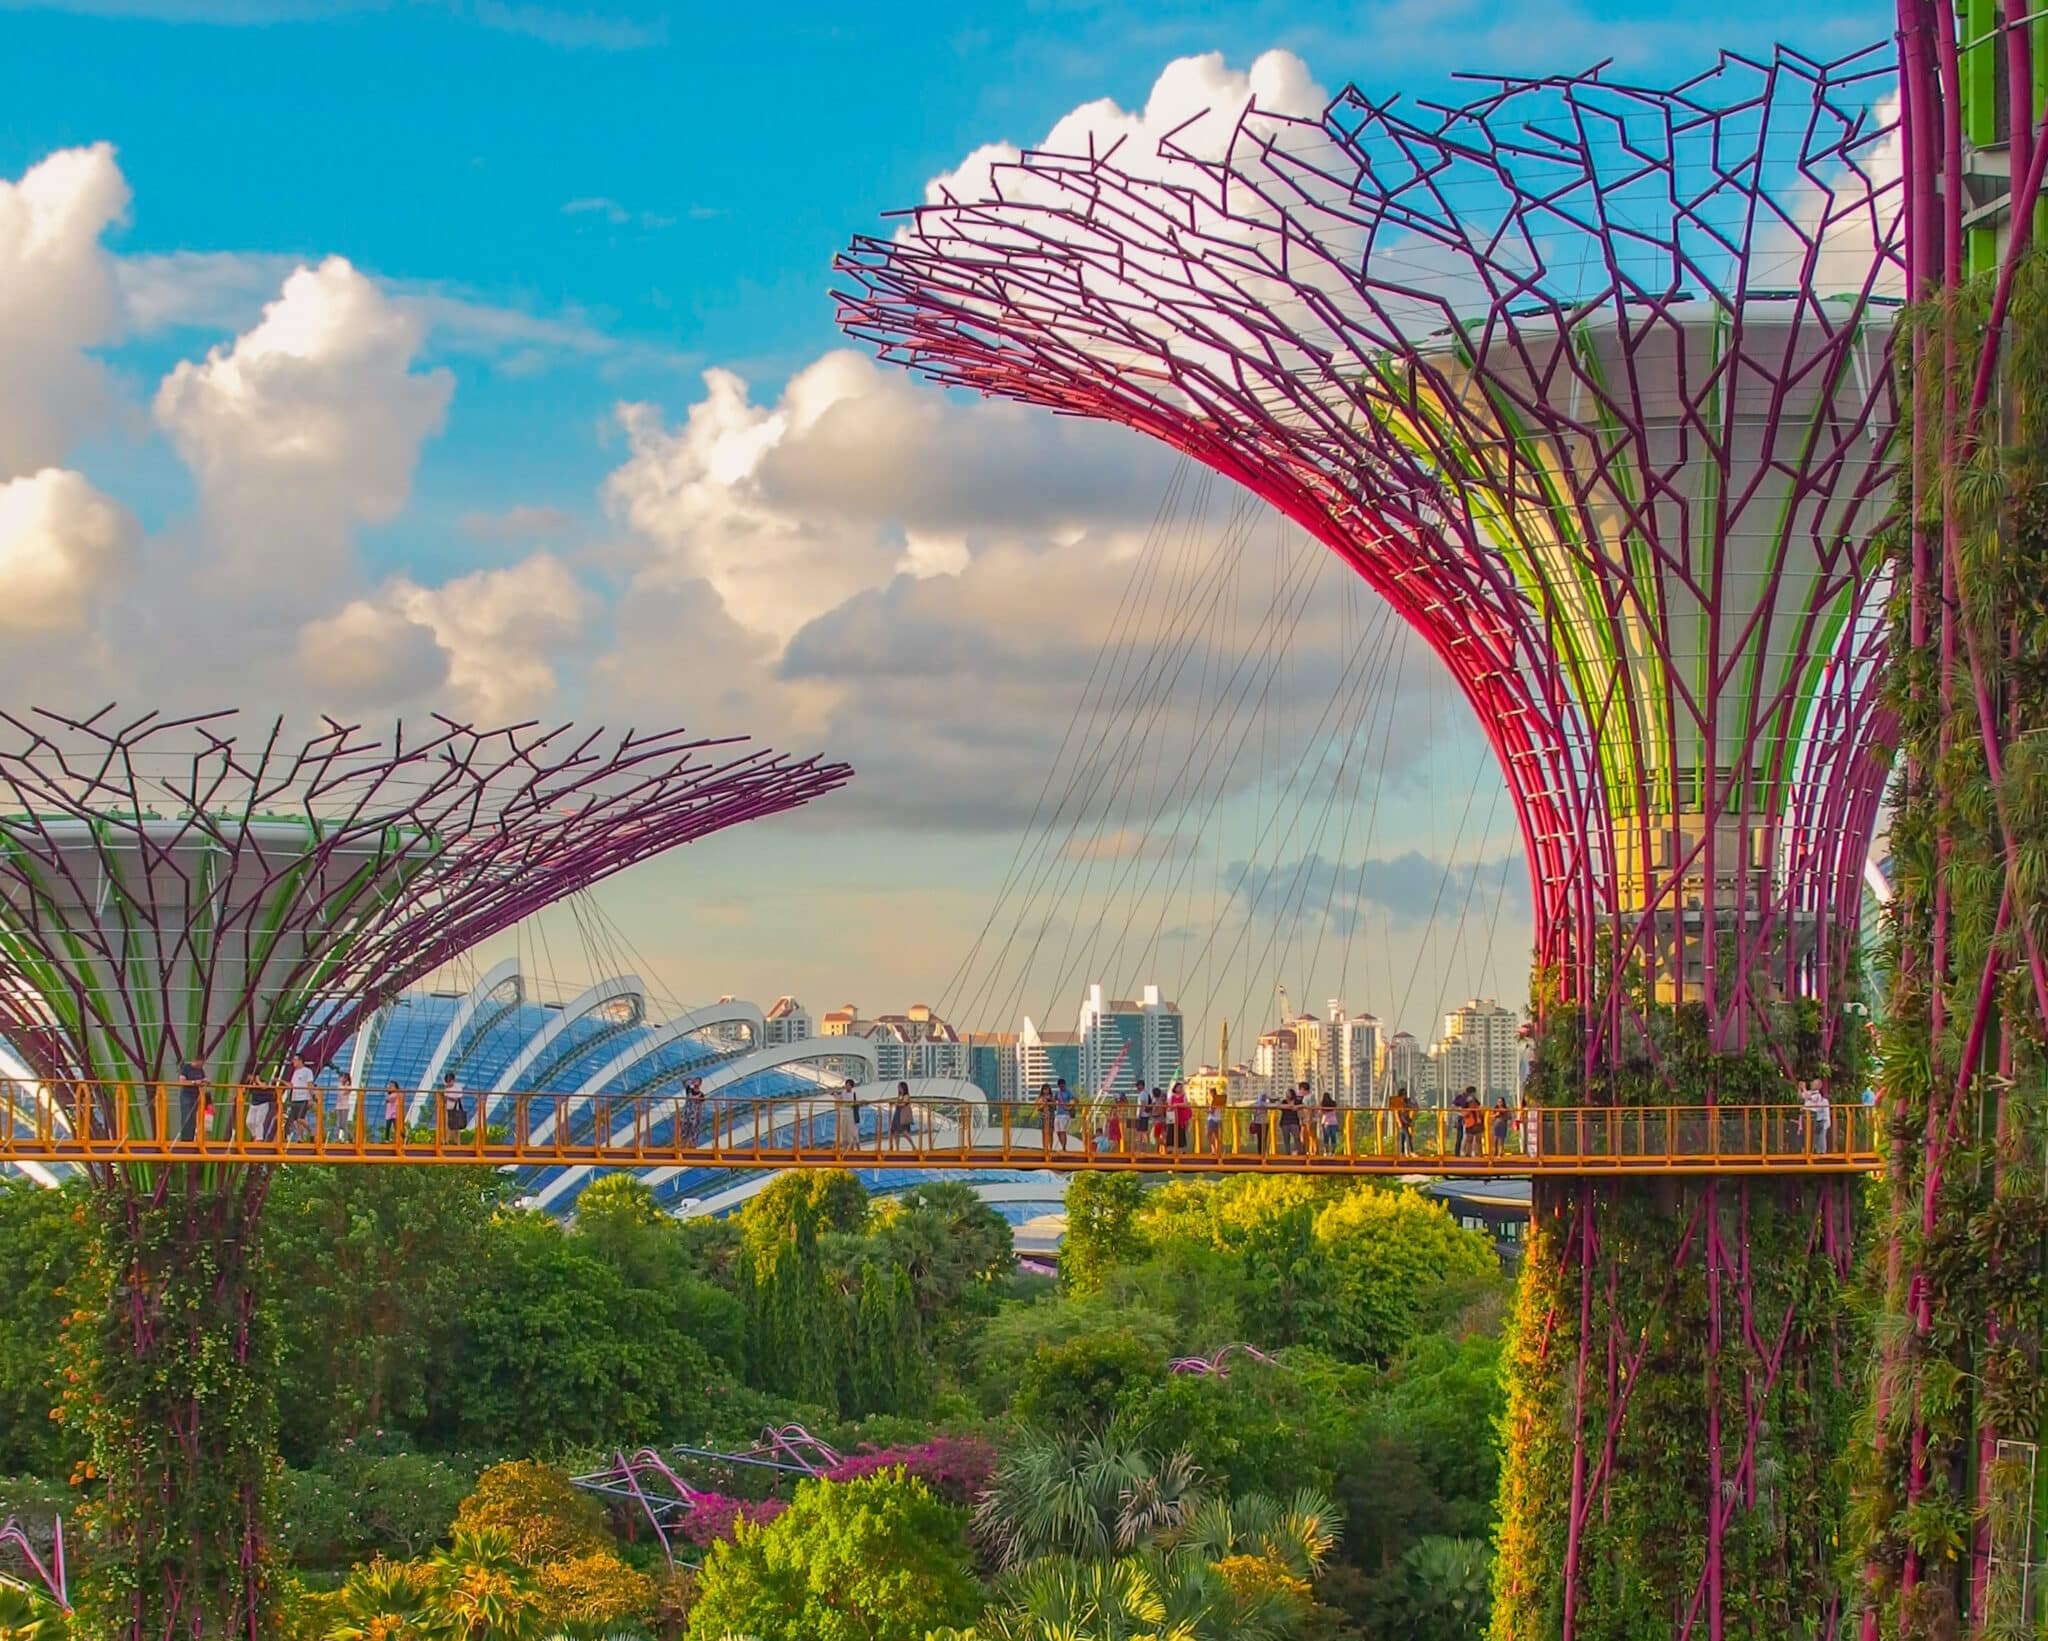 Solar trees in the Super Tree Grove at Gardens by the Bay, Singapore